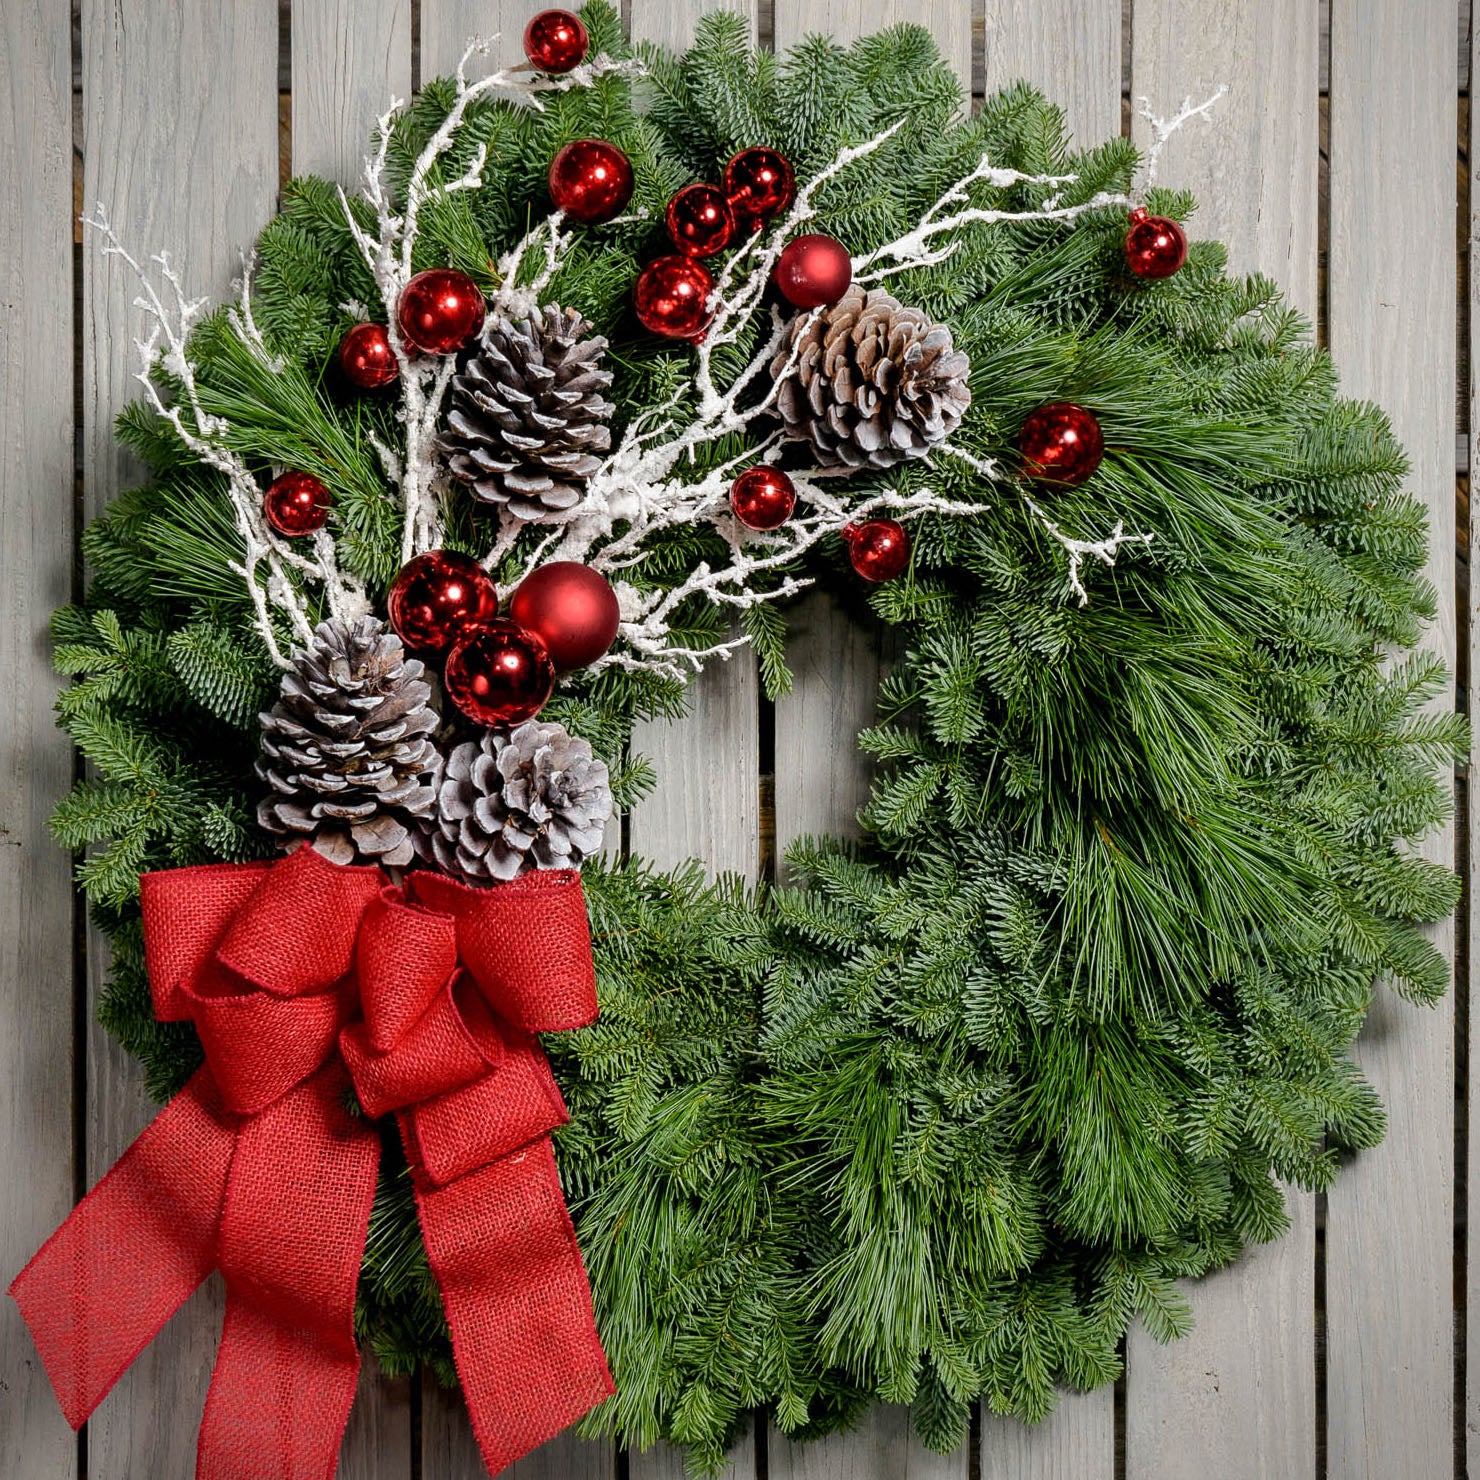 Christmas wreath made with noble fir, pine, pine cones, snow-covered branches, red balls and a red burlap bow close up